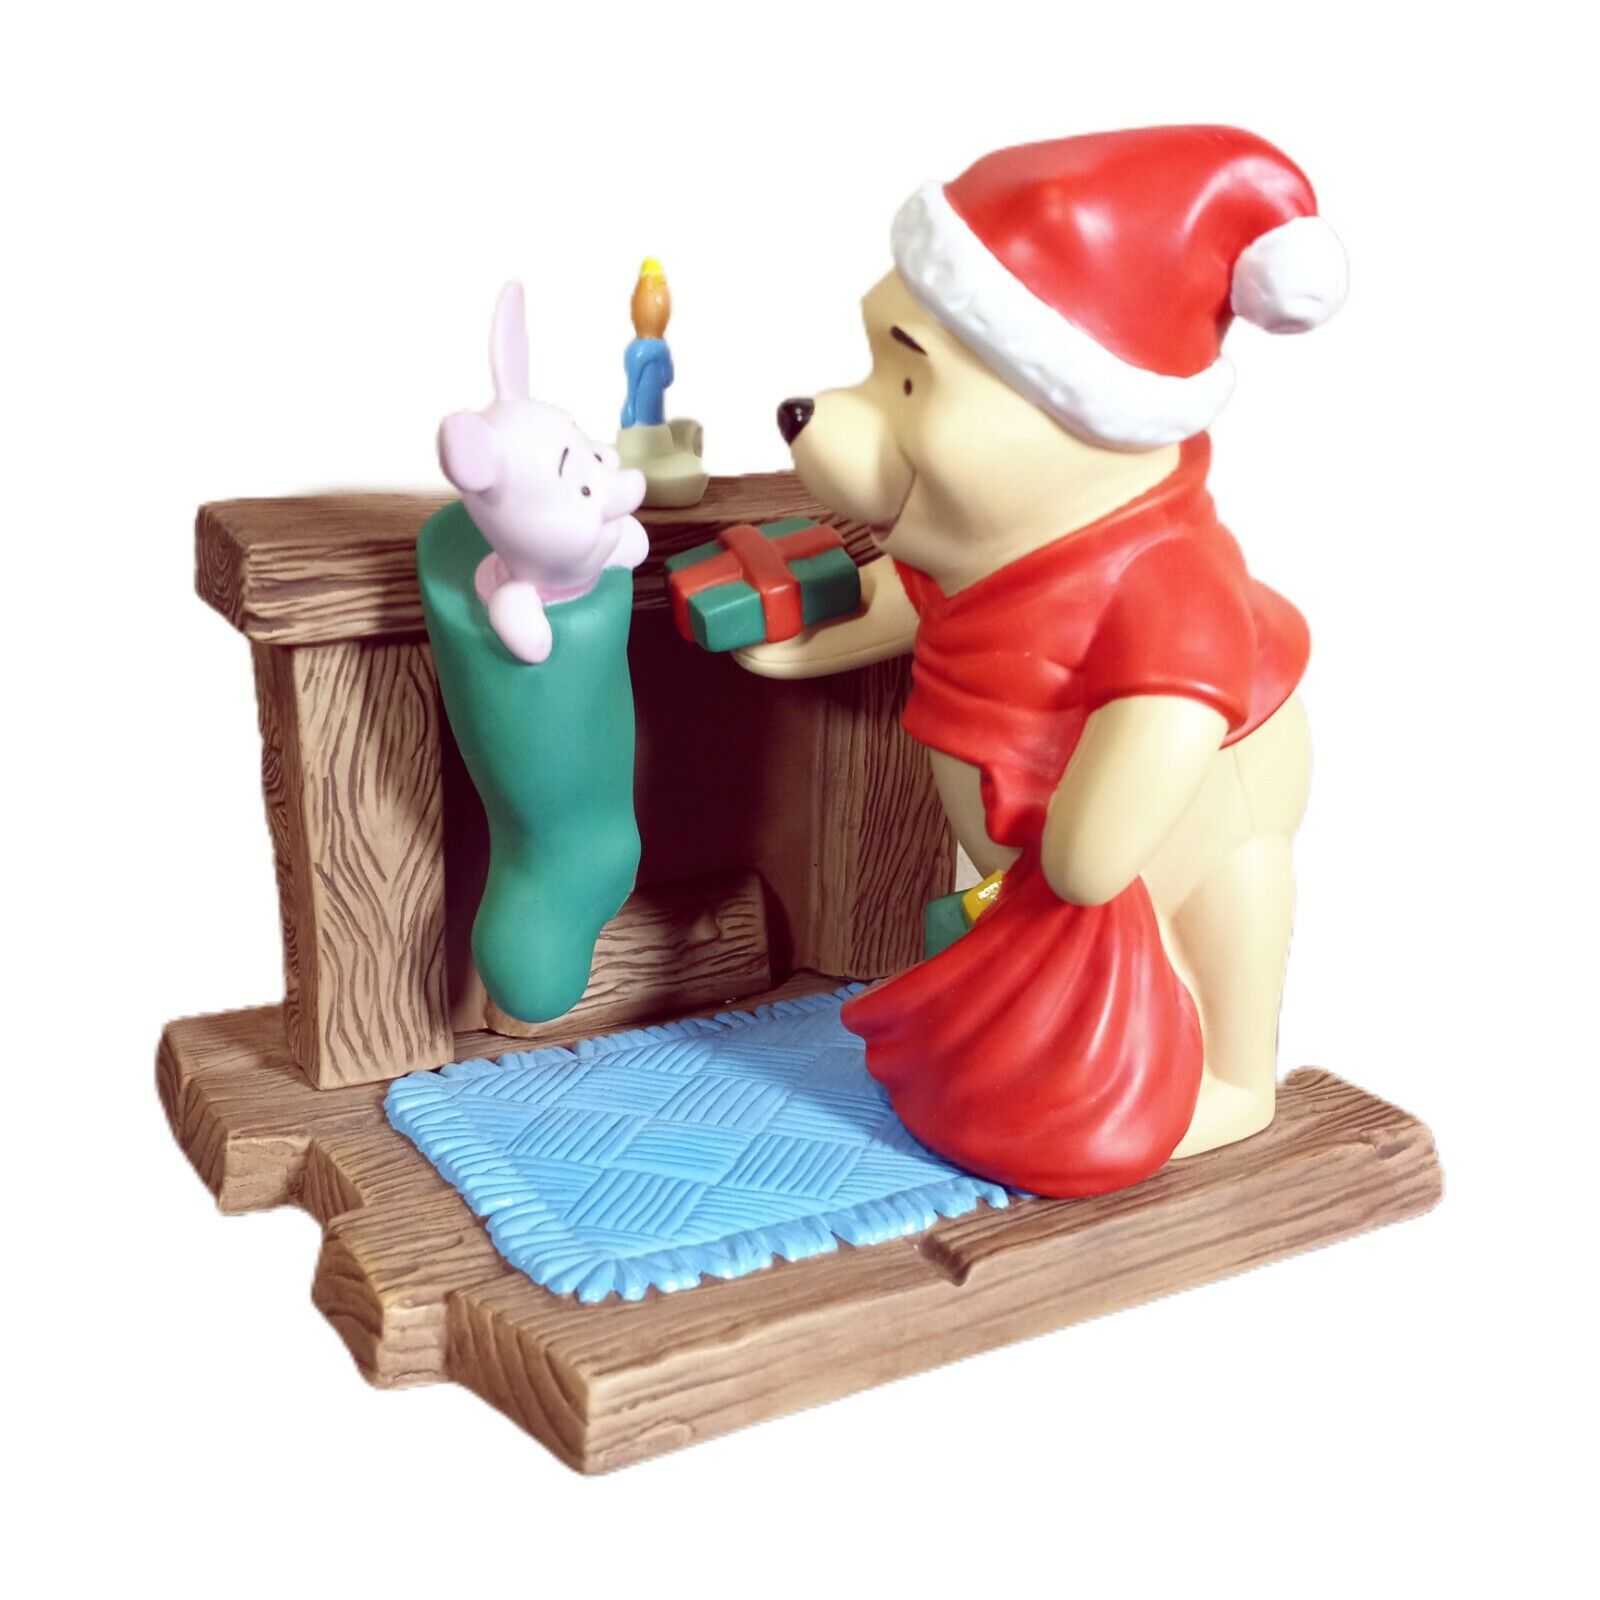 Disney Pooh & Friends A Bit of Holiday Cheer Pooh & Piglet Retired Thailand